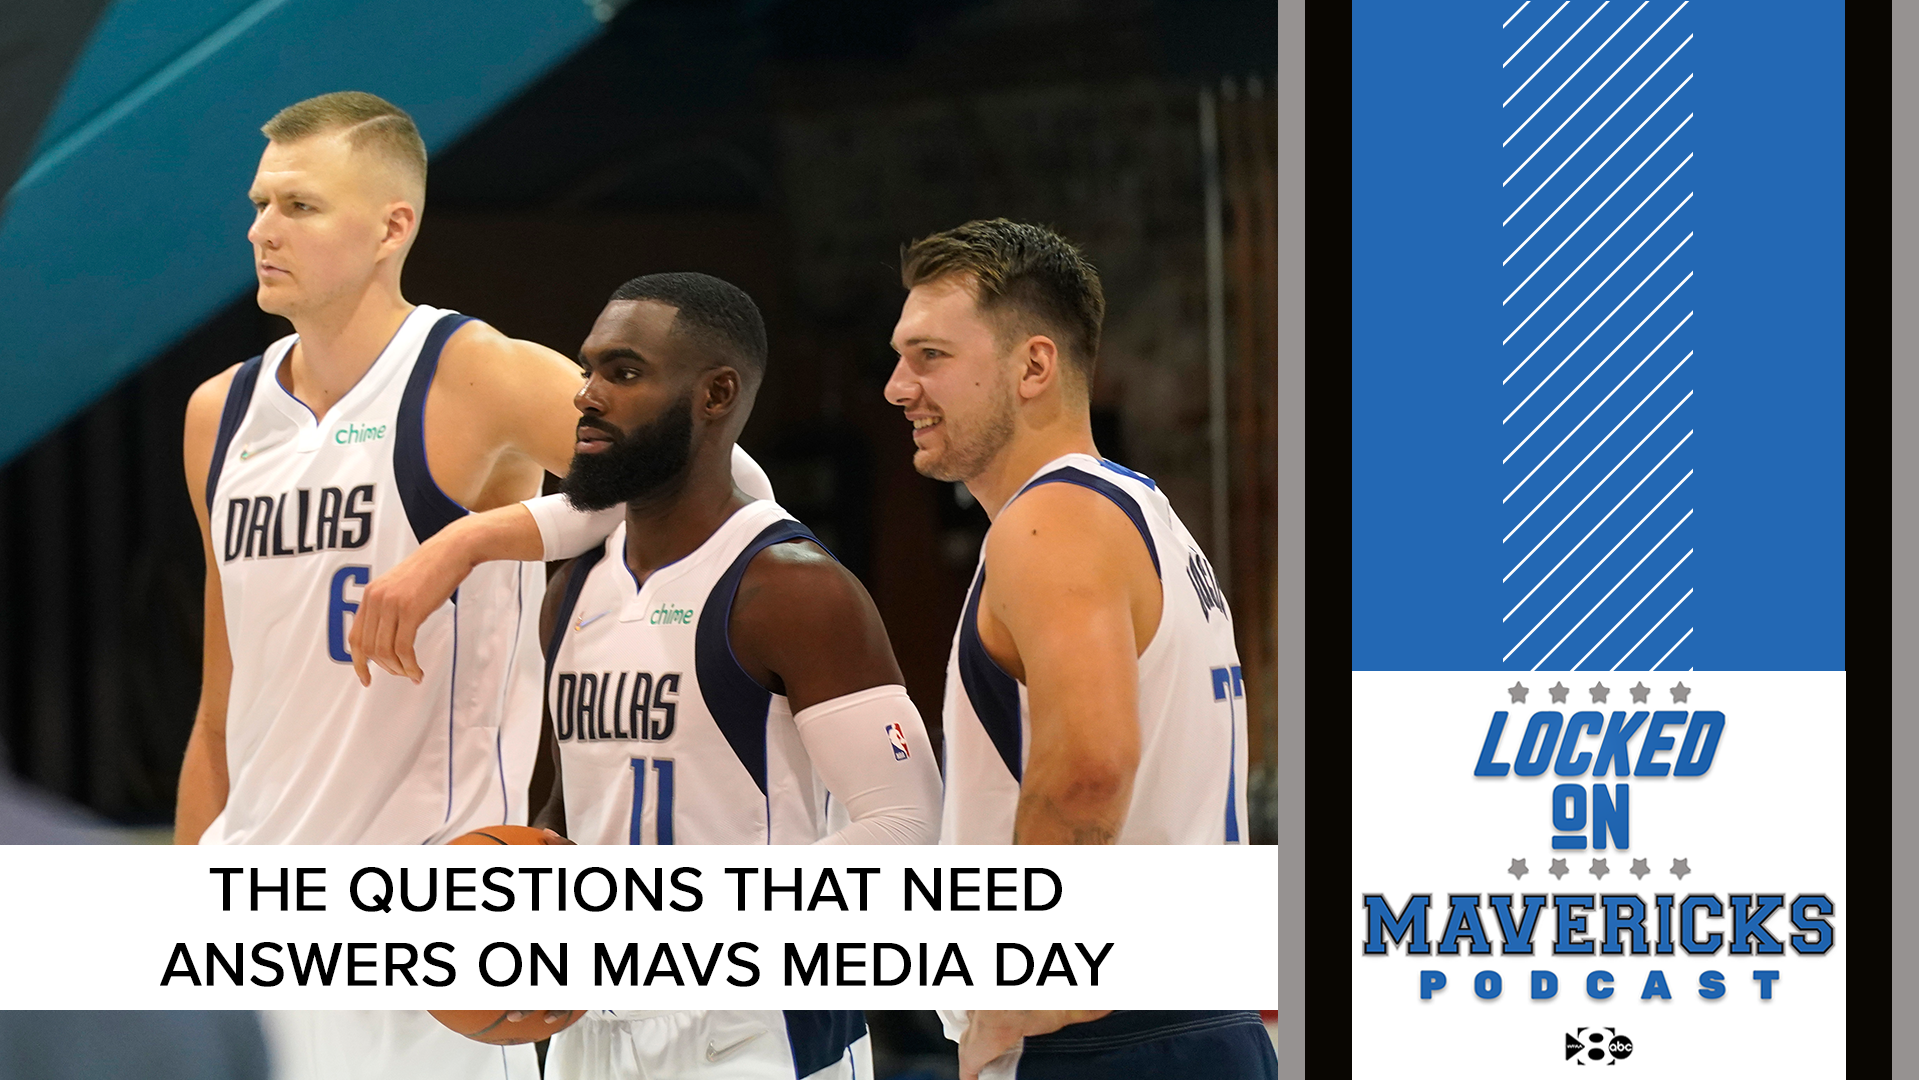 Looking ahead to Mavs media day, @NickVanExit and @IsaacLHarris ask the questions they want answered by Luka Doncic, Jason Kidd, Kristaps Porzingis and more.